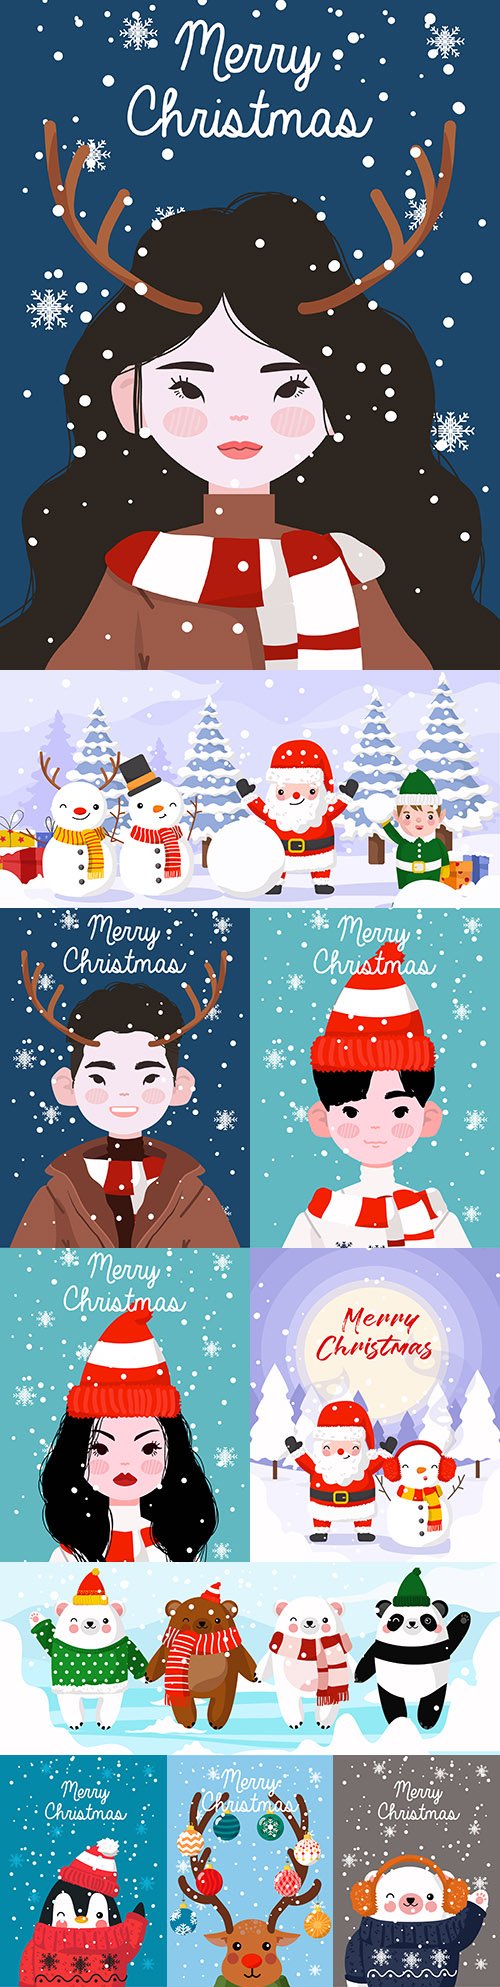 Merry Christmas themed painted flat design illustrations